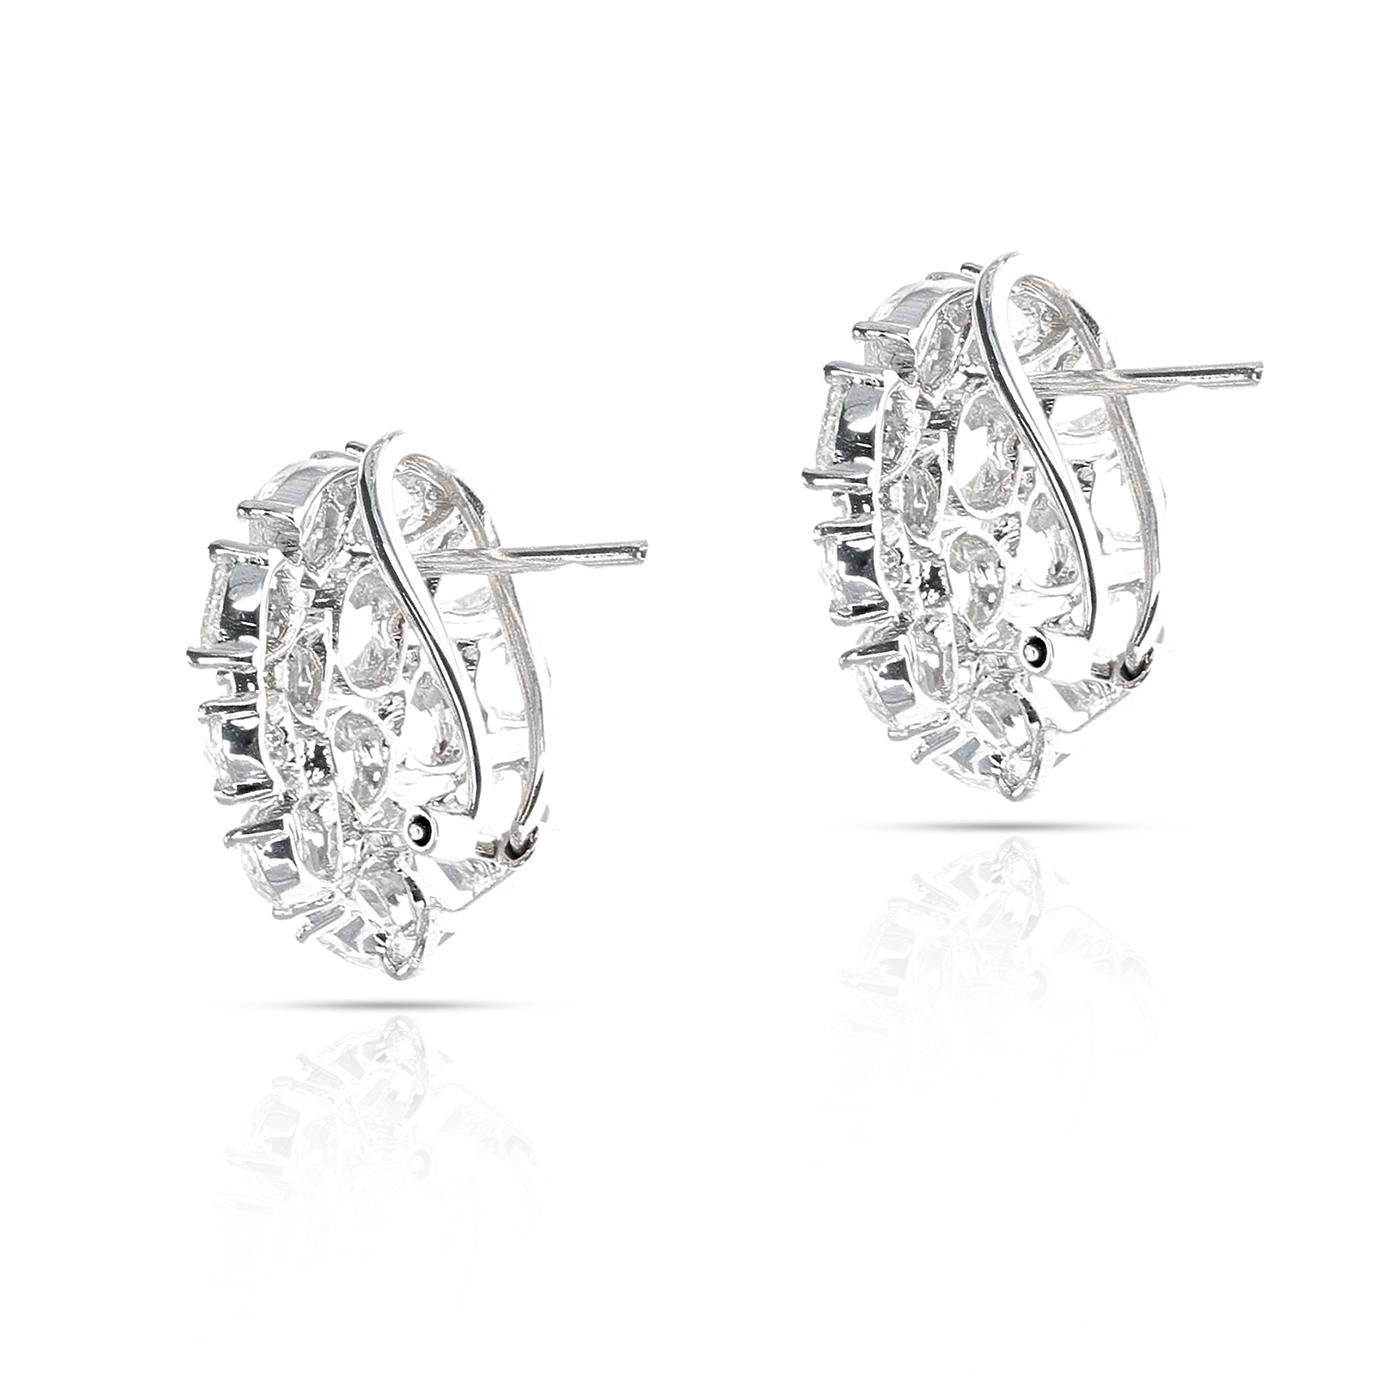 5.87 Ct White Diamond Rose Cut Earrings, 18K White Gold In New Condition For Sale In New York, NY